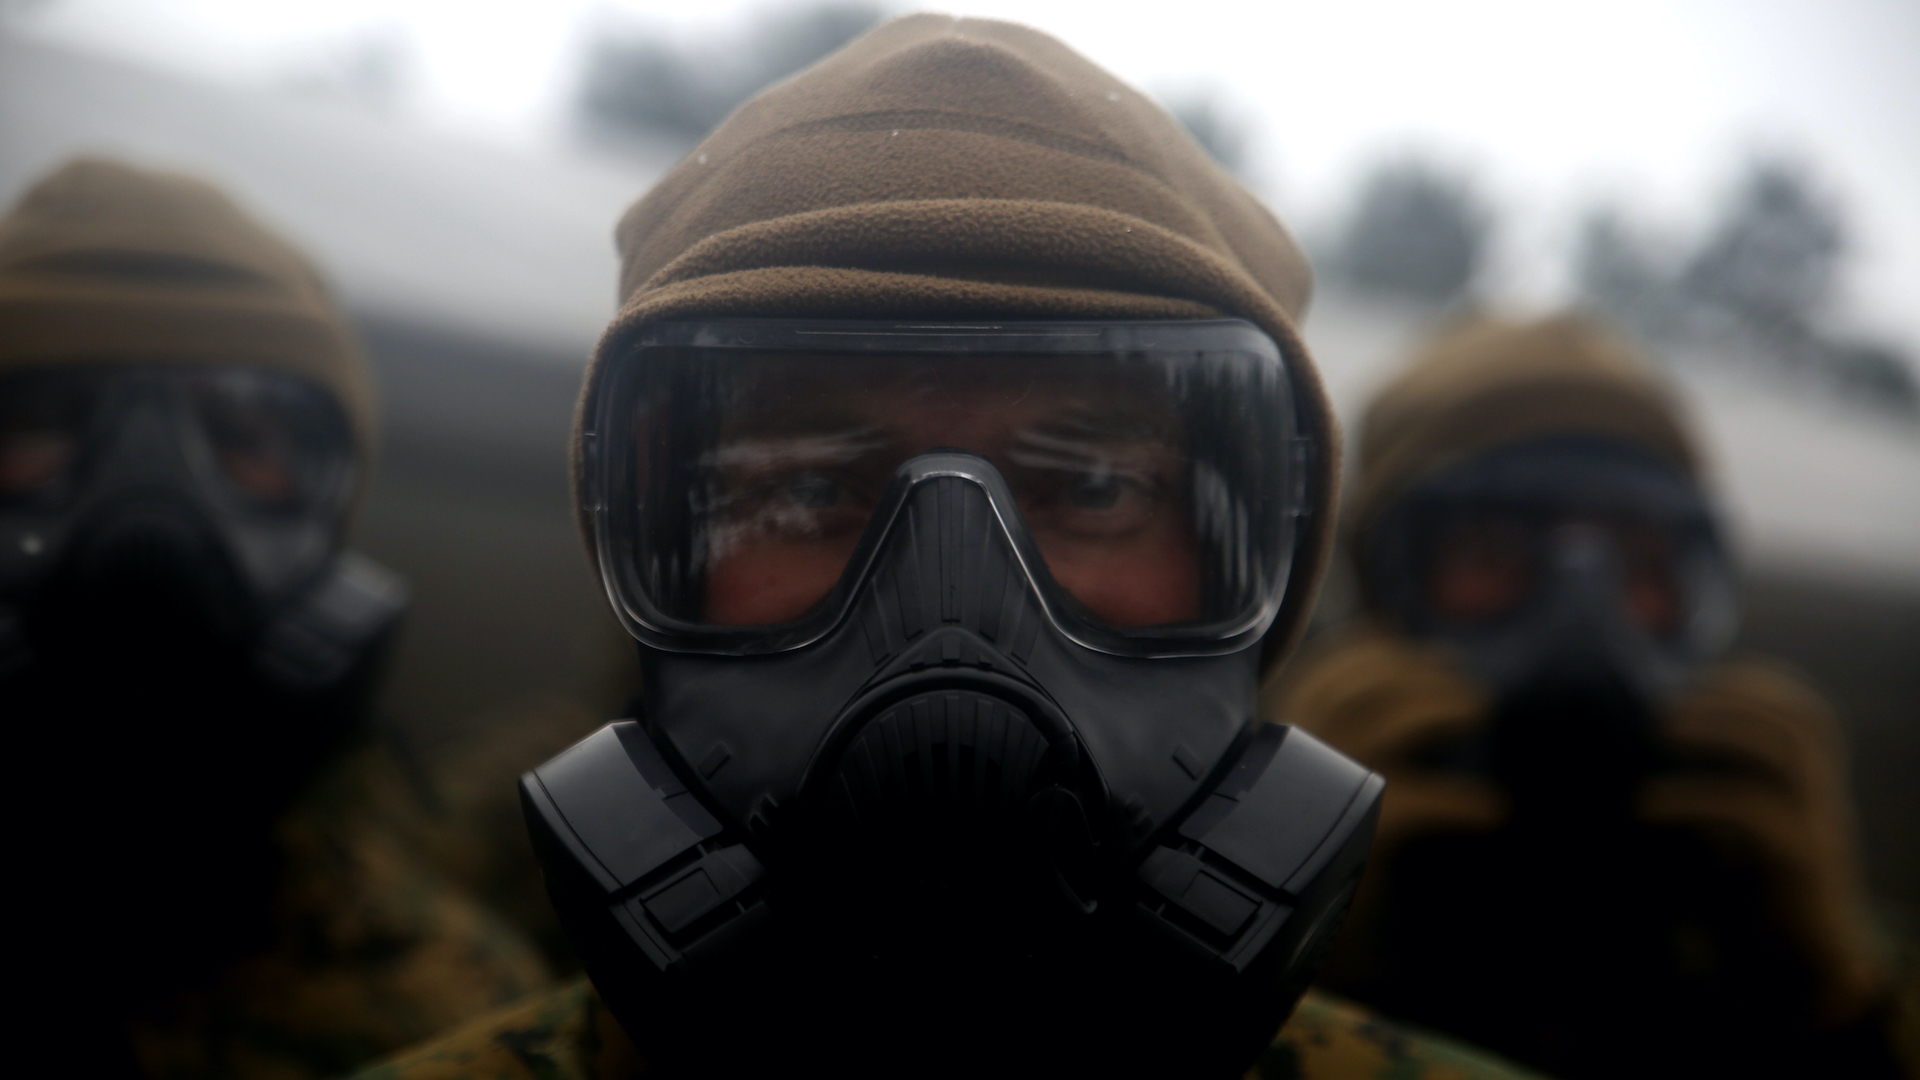 cool gas mask soldier